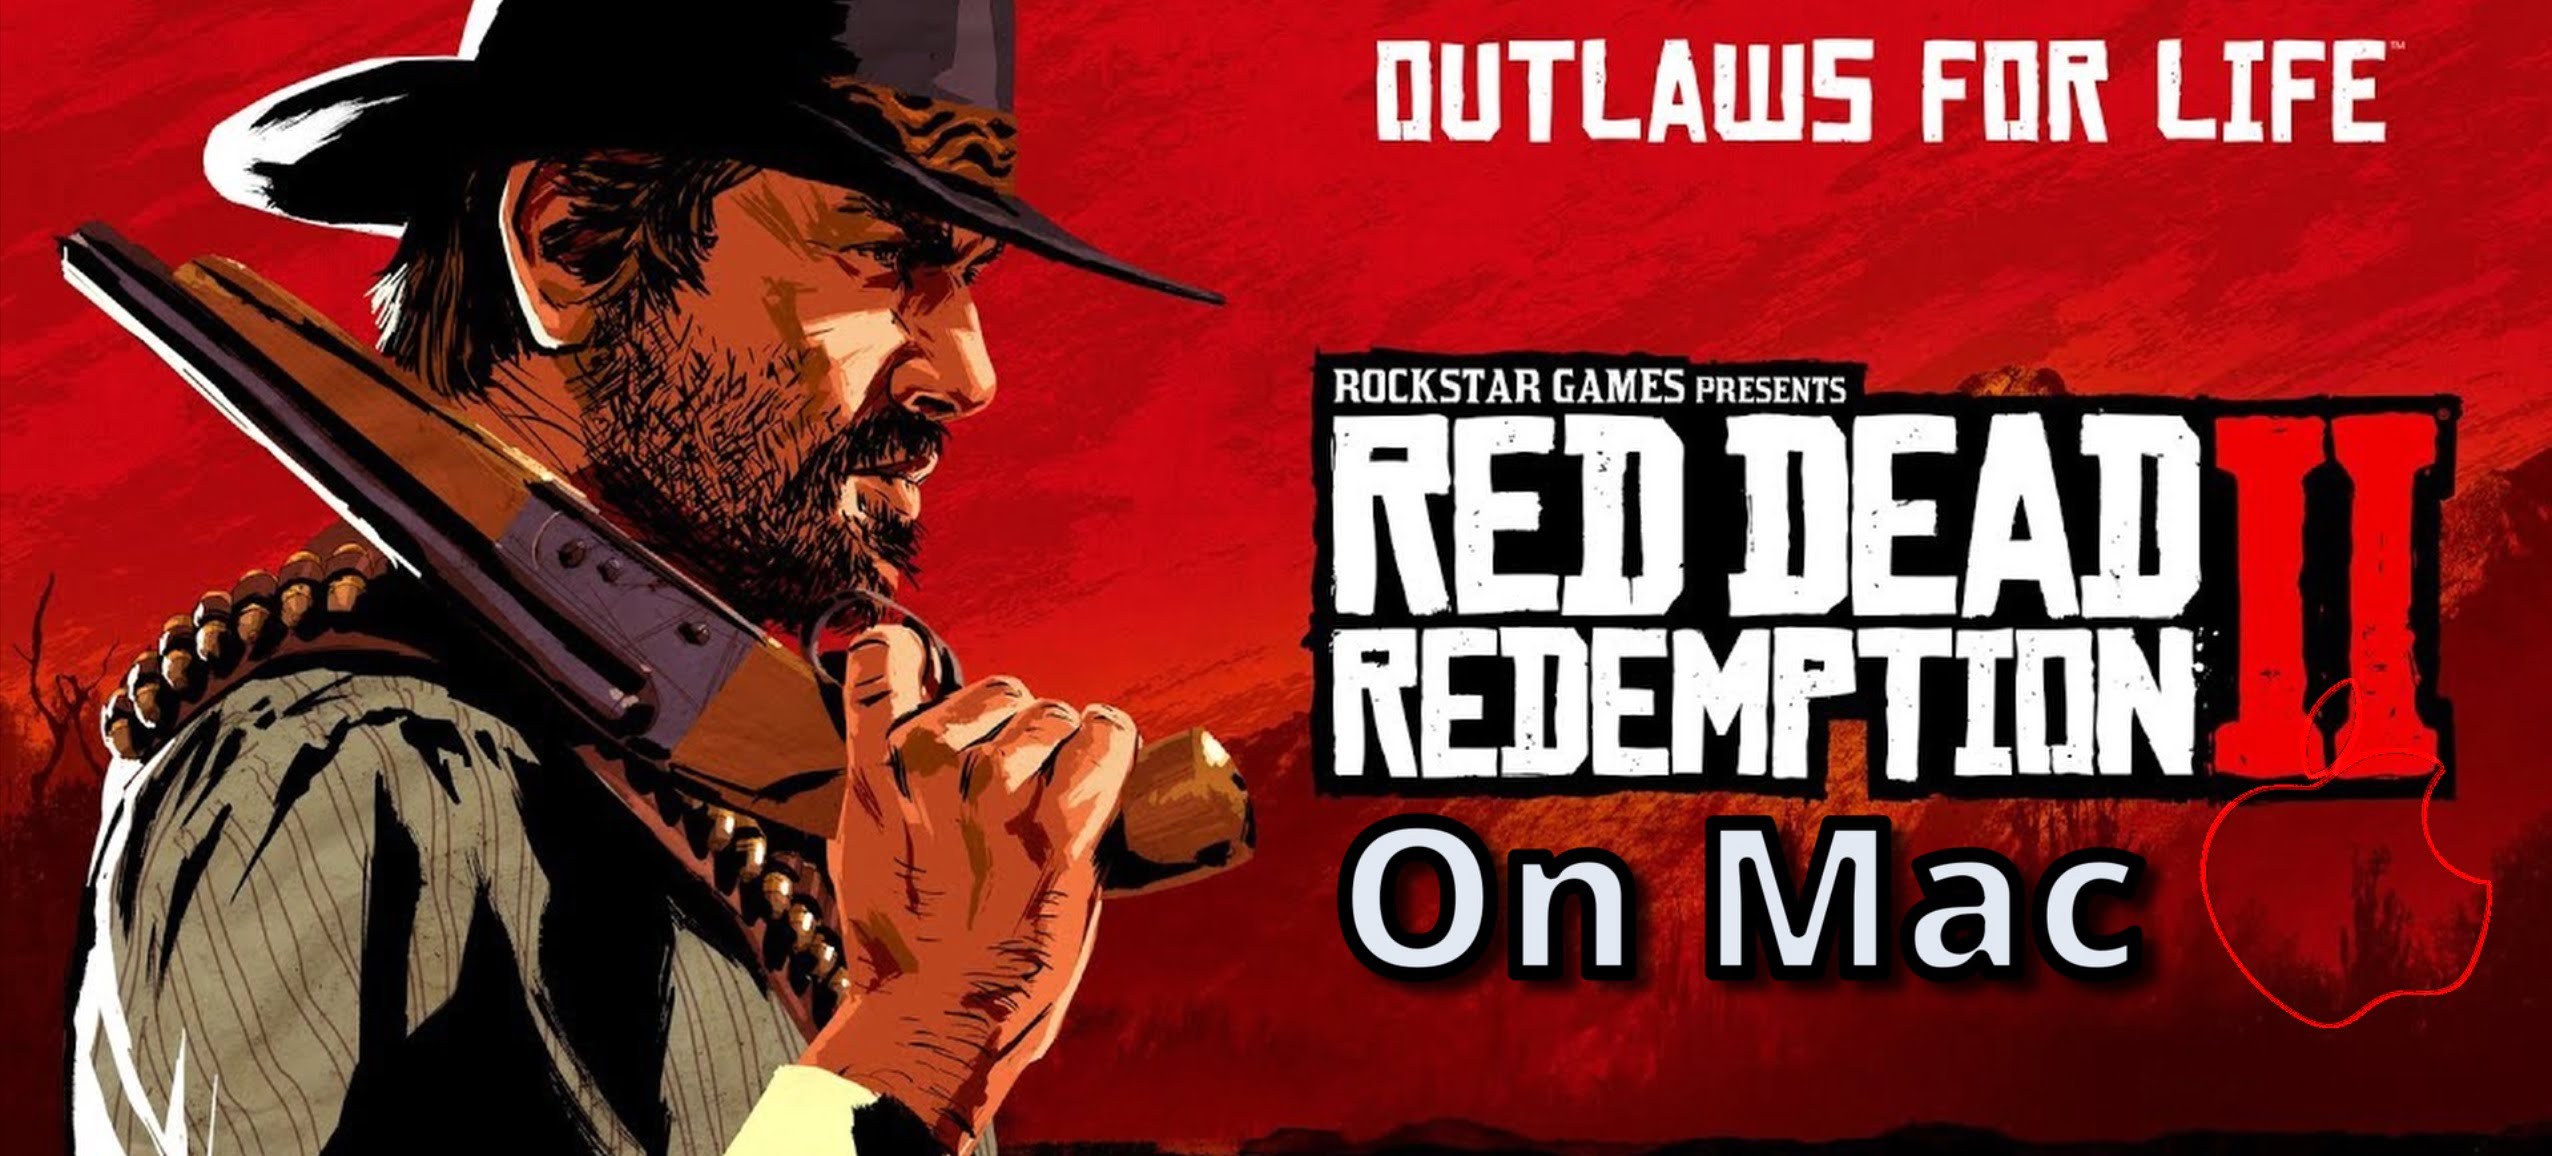 Red Dead Redemption 2 on Mac